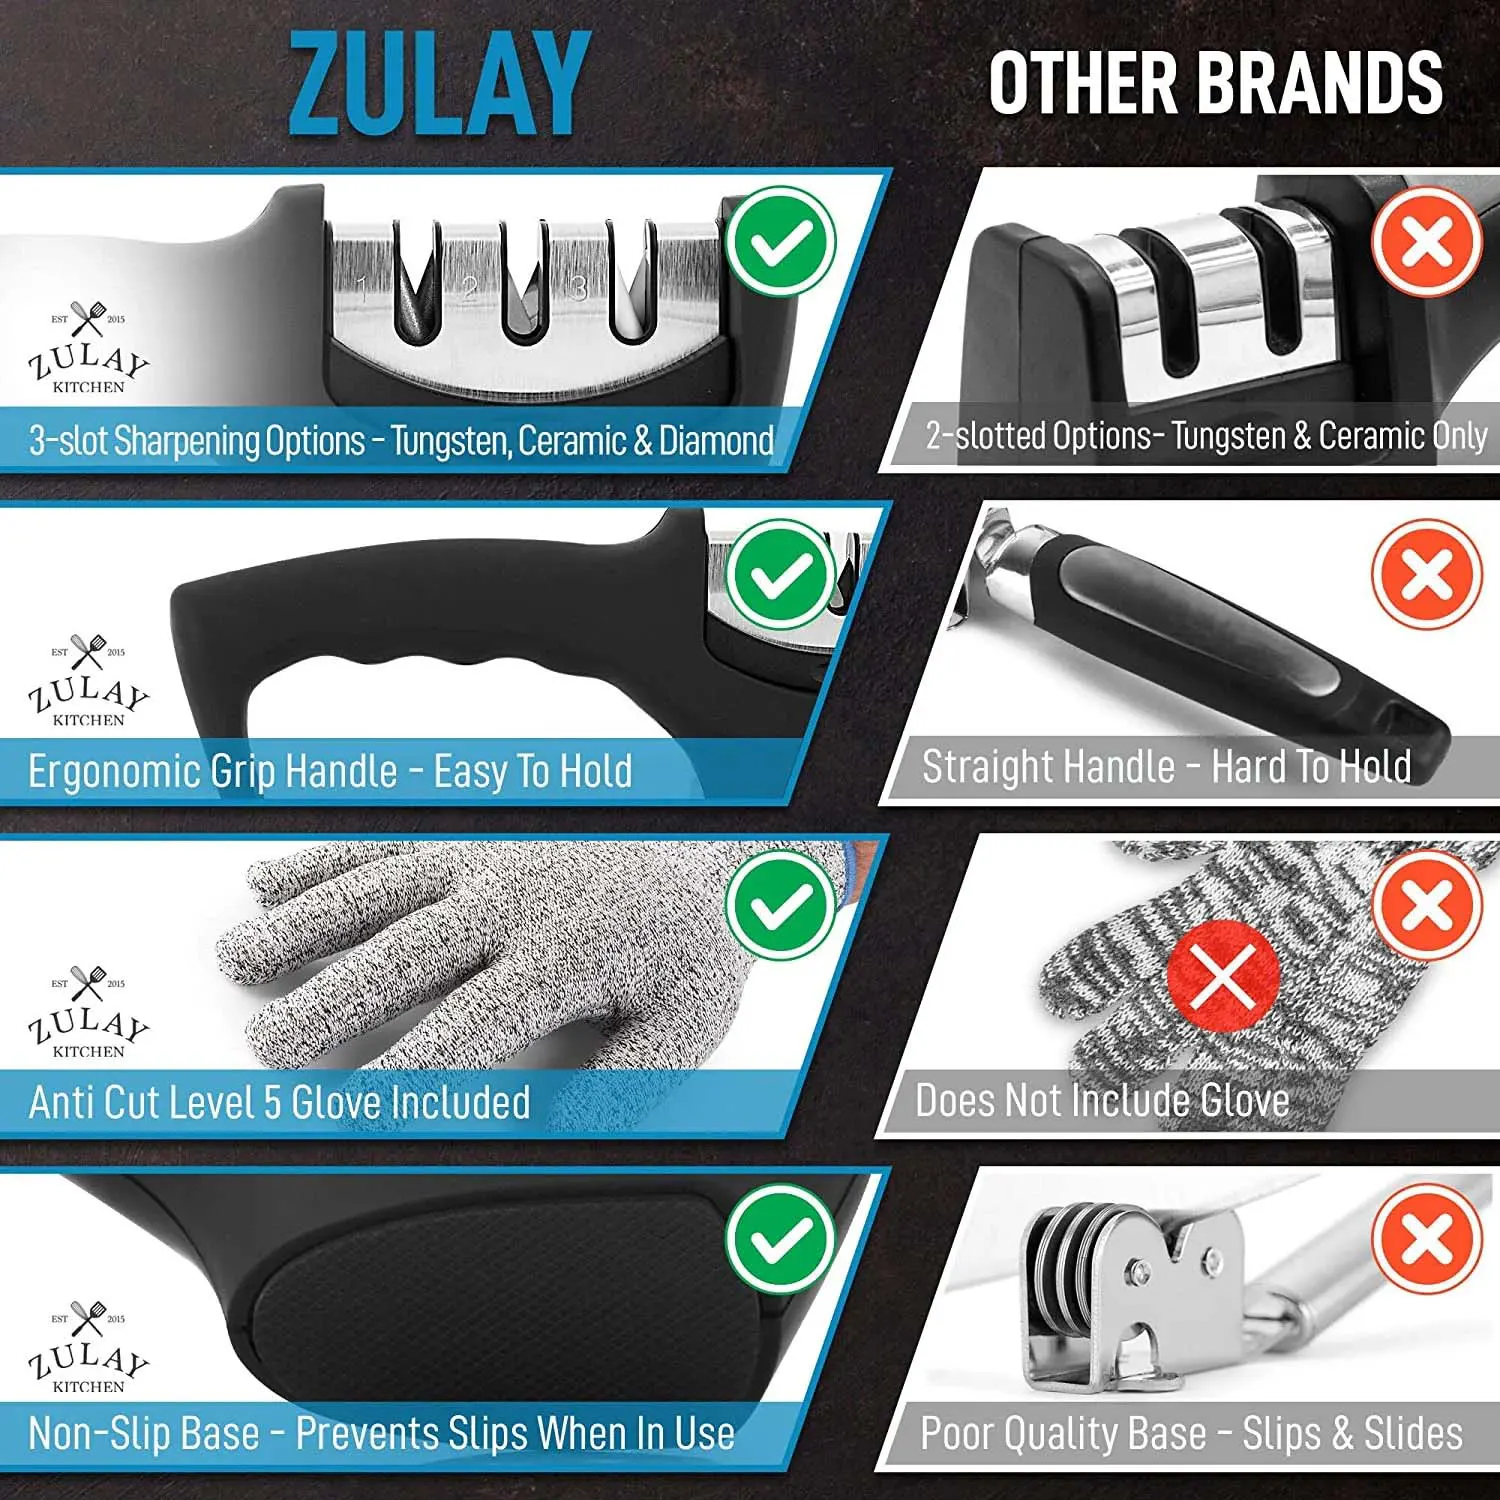 Zulay Kitchen 3 Stage Knife Sharpener And Cut-resistant Glove